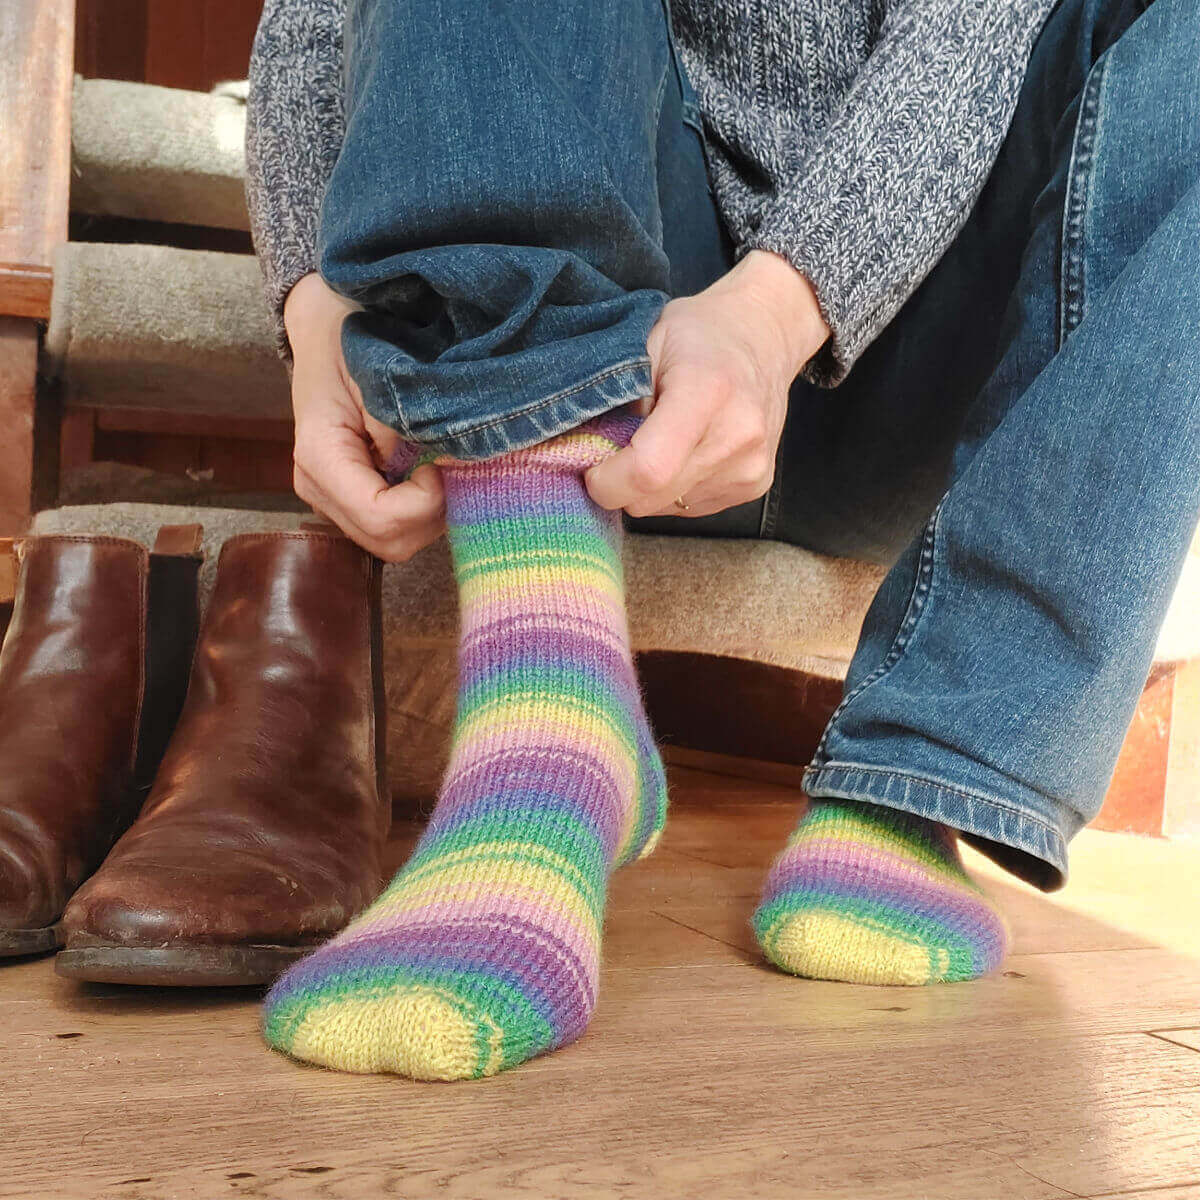 Christine is sitting on the bottom step of the staircase putting on a pair of pink, blue, green, purple and yellow striped socks. There is a pair of brown boots on the wooden floor next to her.